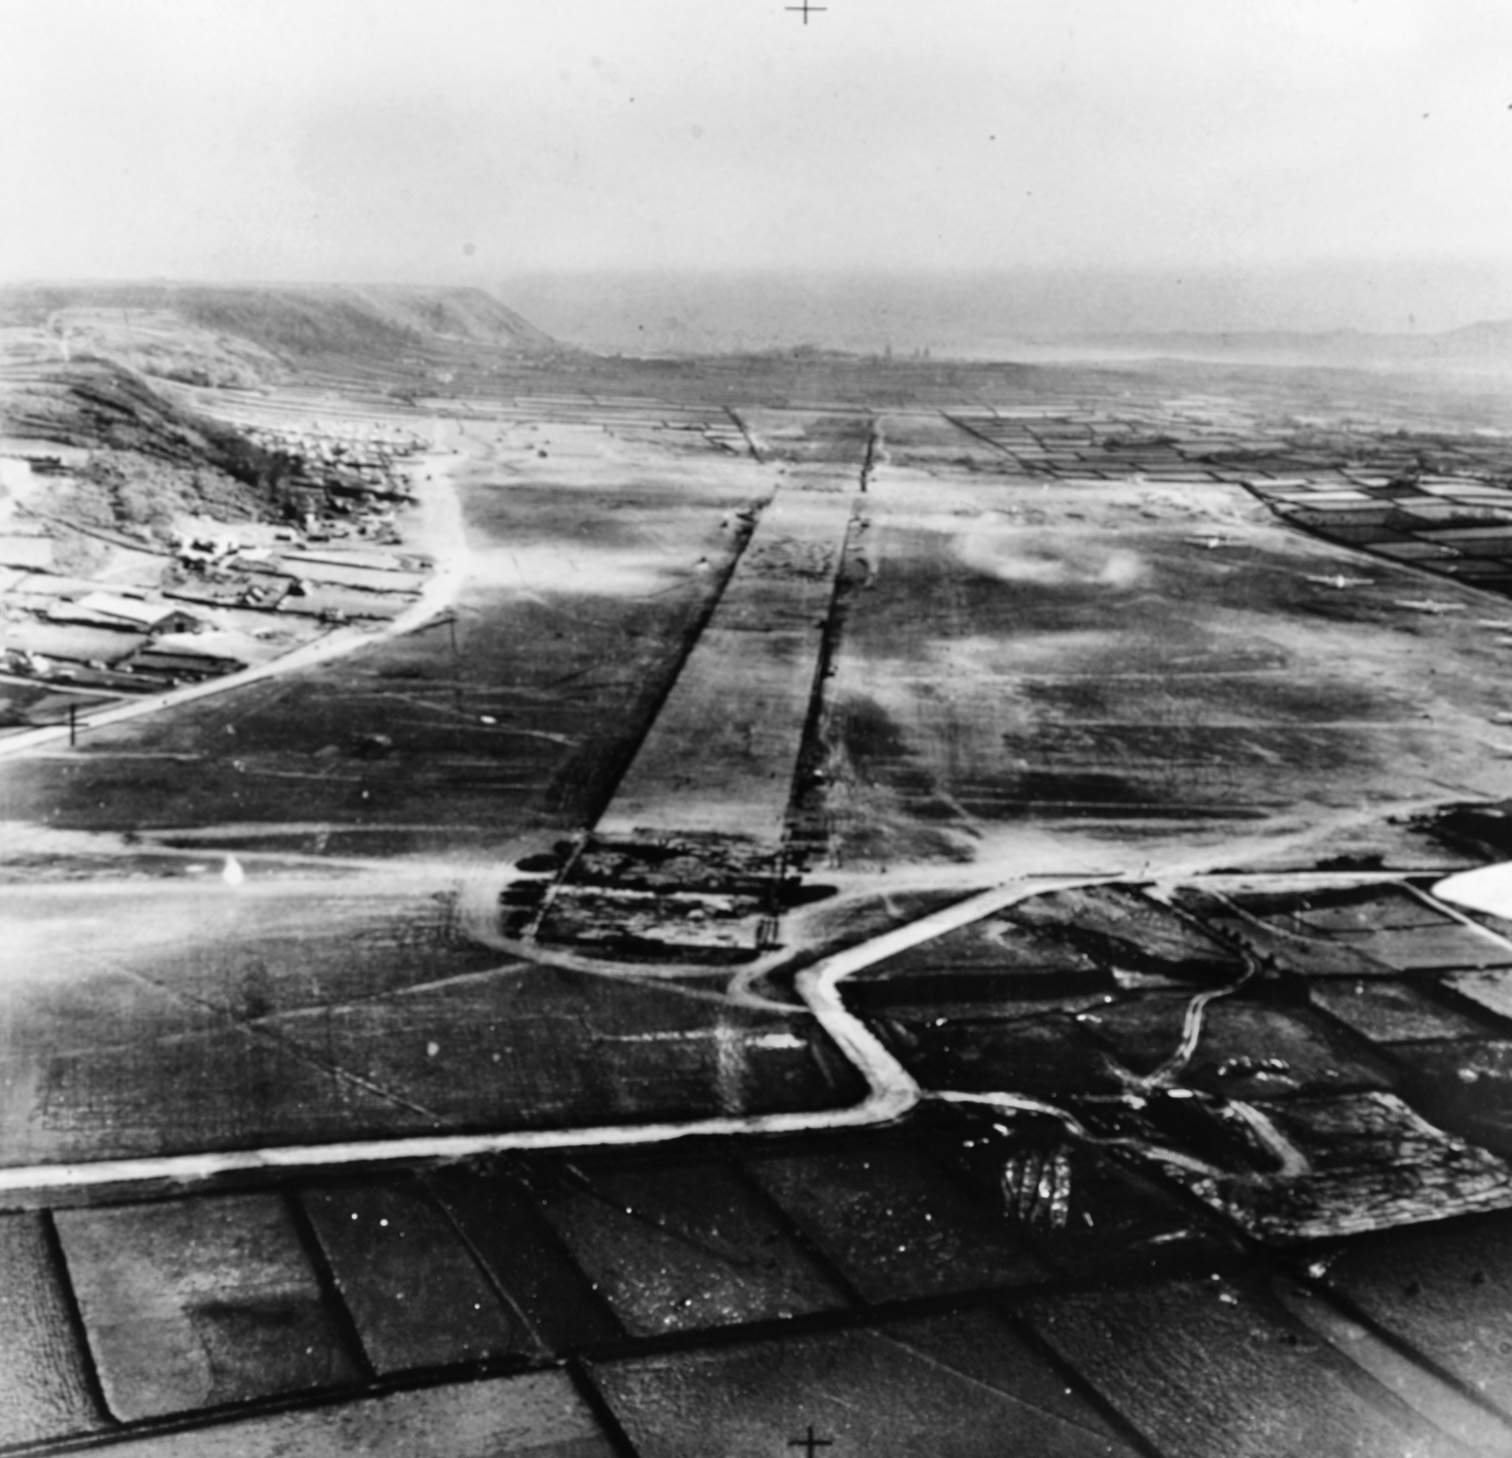 Constructed on Terciera Island in the Azores, Lagens Field, shown here in 1943, was the tactical hub for Allied aircraft deployment in the area of the Atlantic where a treacherous gap had once existed, allowing German U-boats to prowl almost at will in their hunt for Allied convoys.